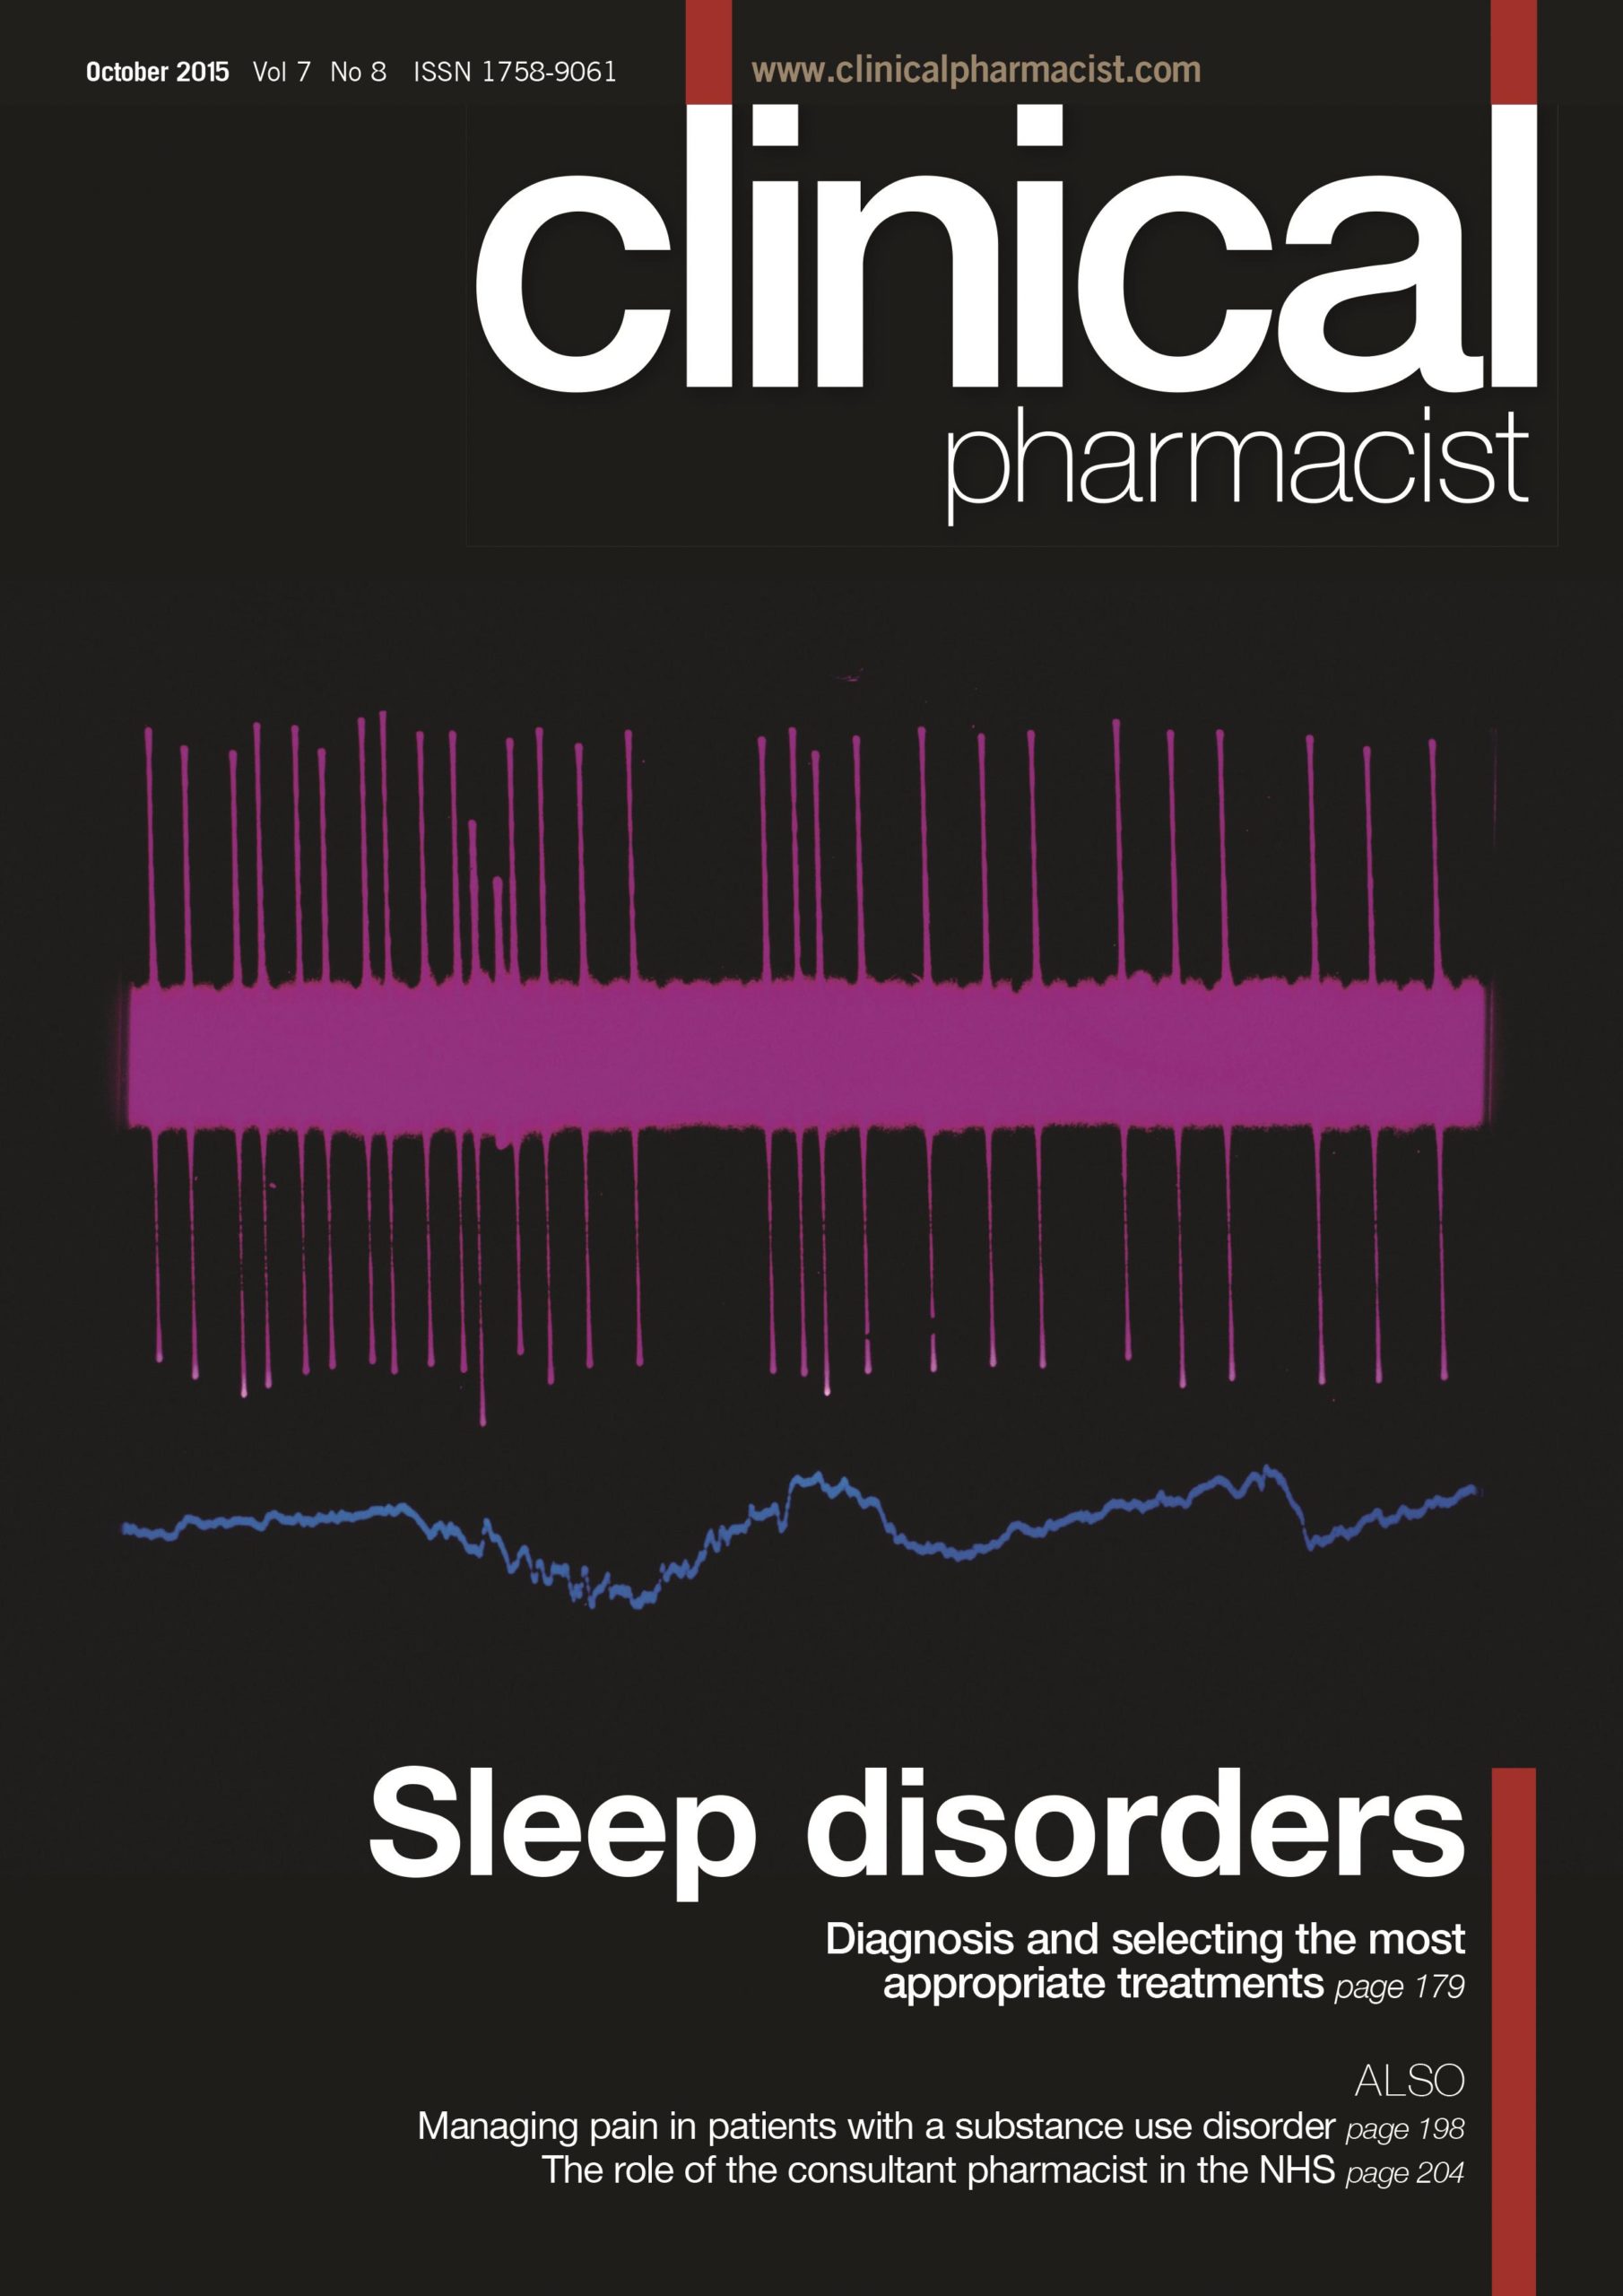 Publication issue cover for CP, October 2015, Vol 7, No 9